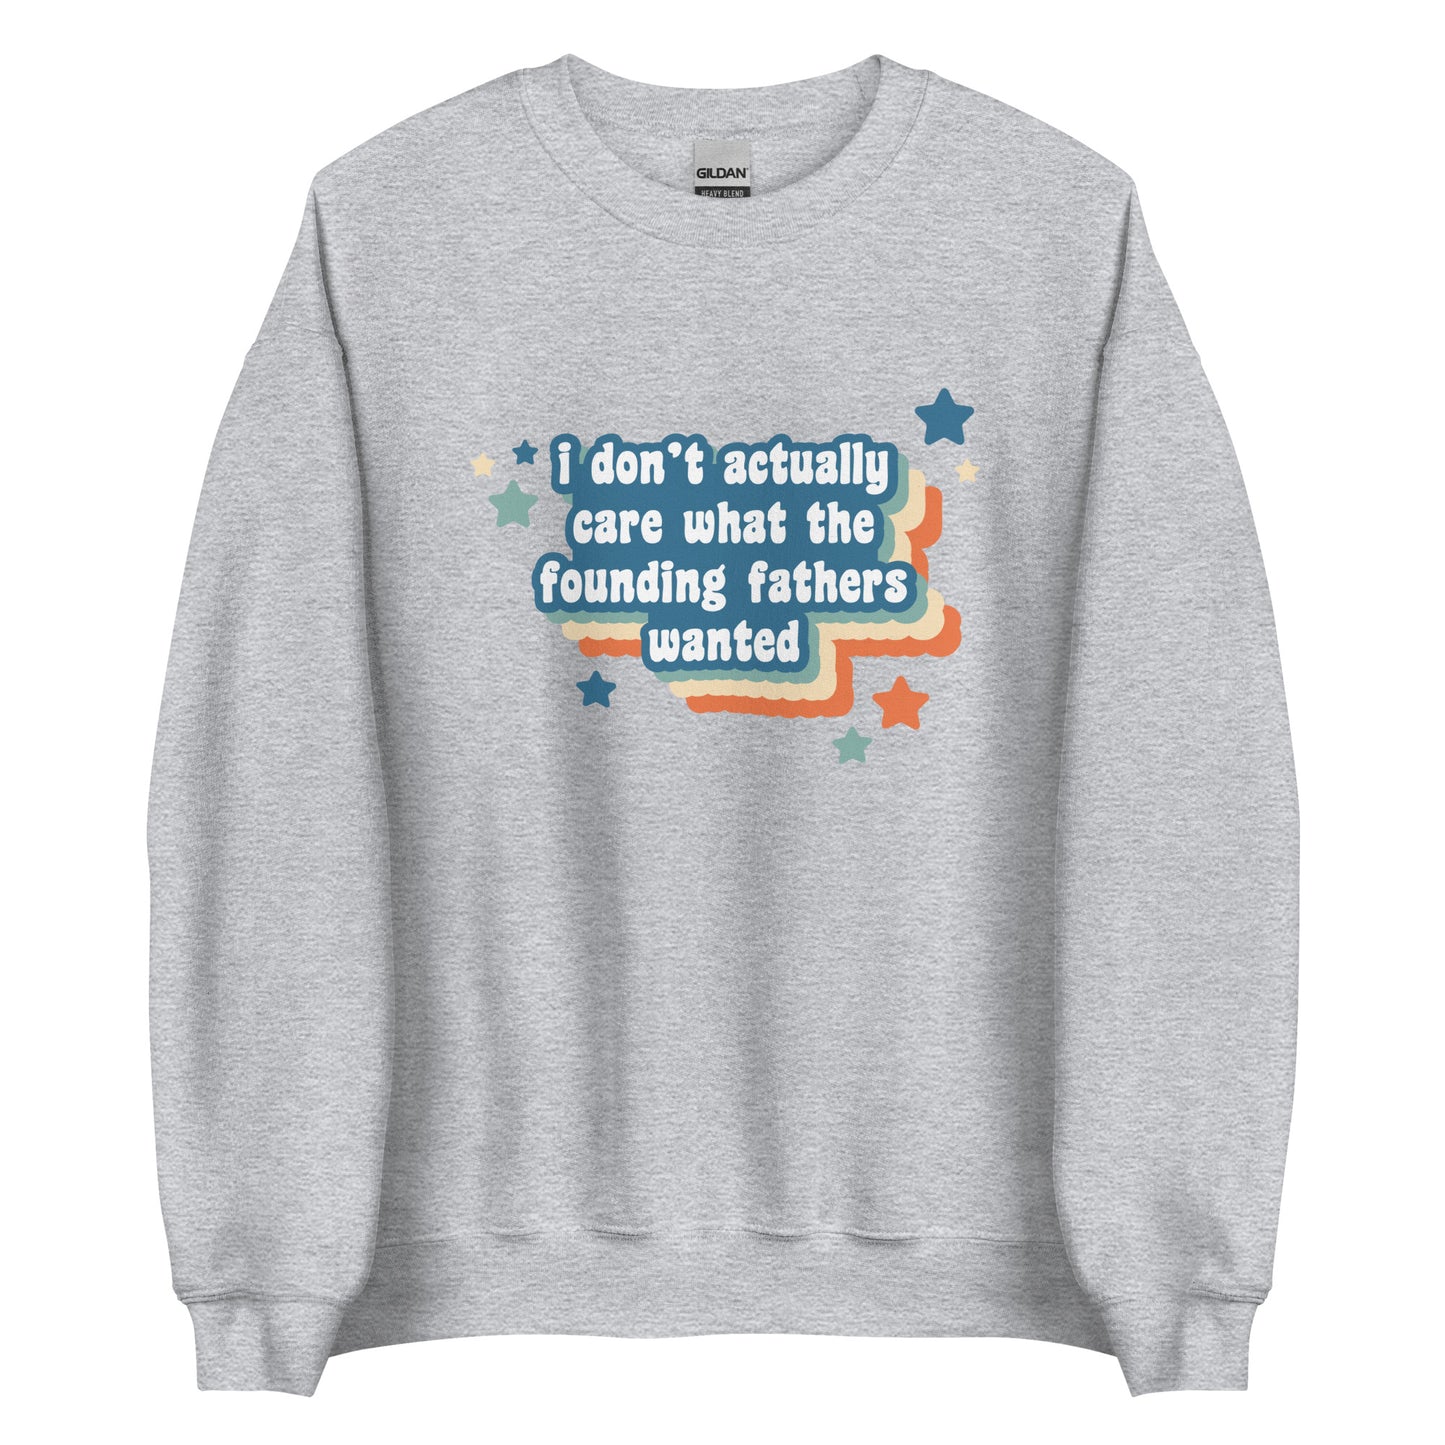 A grey crewneck sweatshirt featuring text that reads "I Don't Actually Care What The Founding Fathers Wanted". Colorful stars and a drop shadow surround the text.